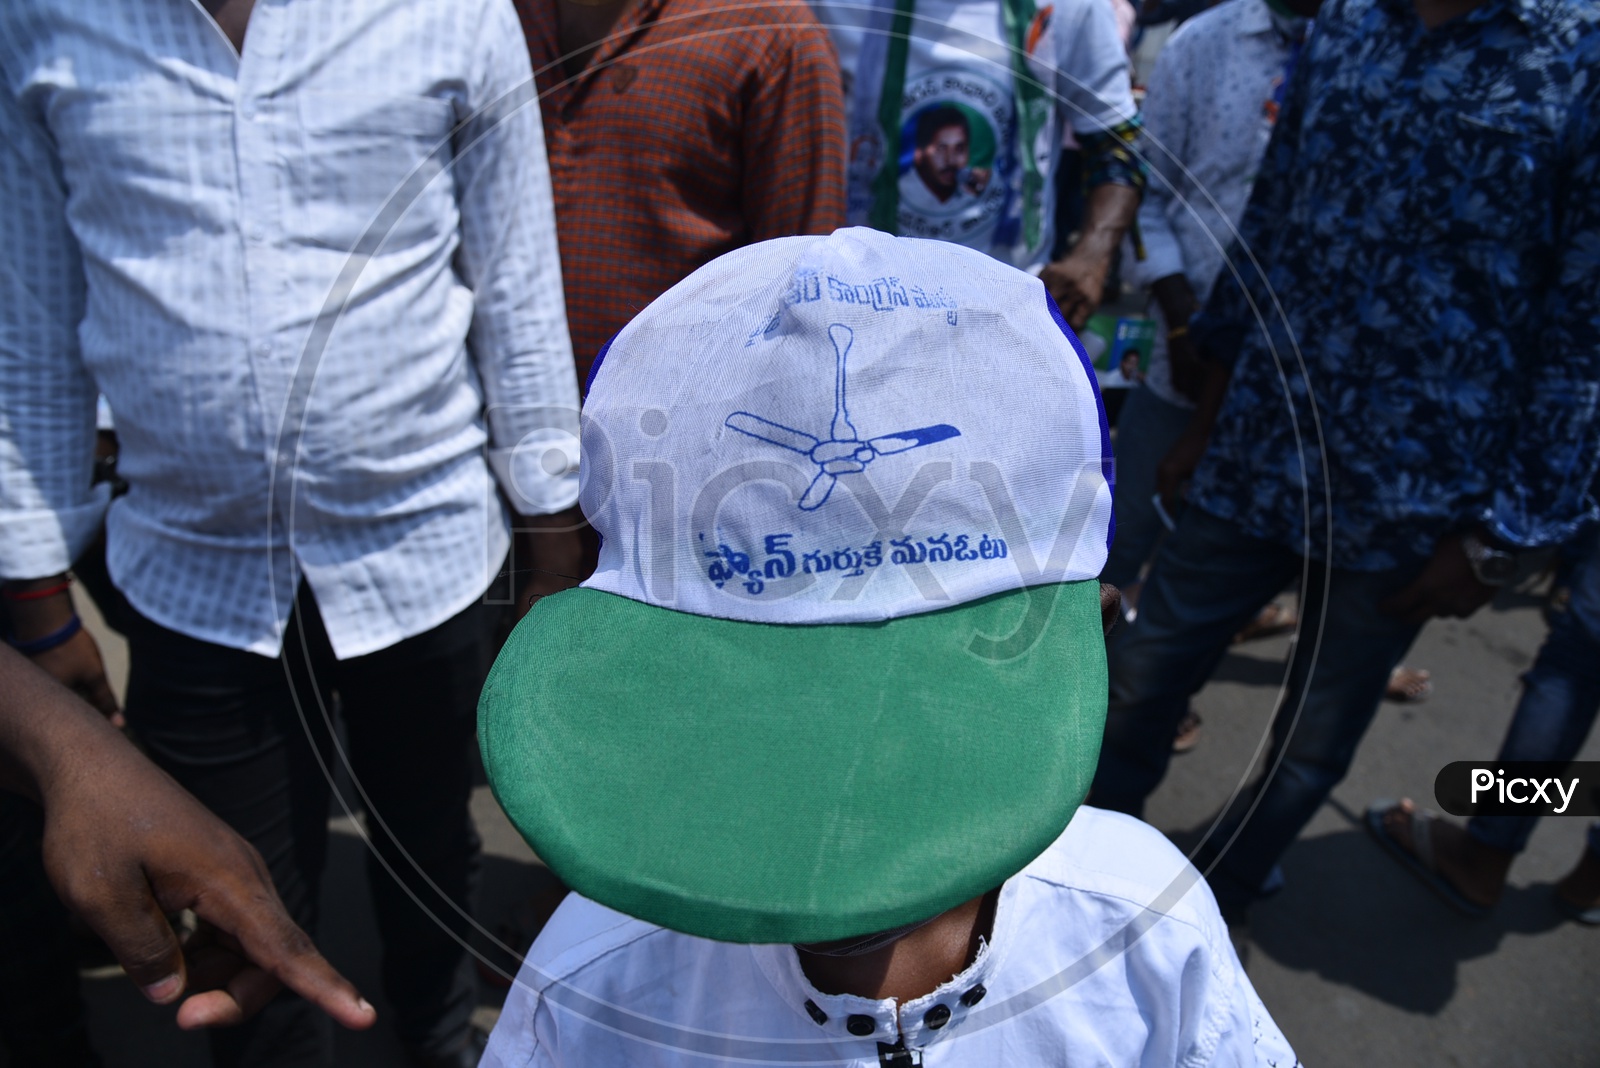 A Small Kid Wearing The YSRCP Supporter Cap During Election Campaign Rally